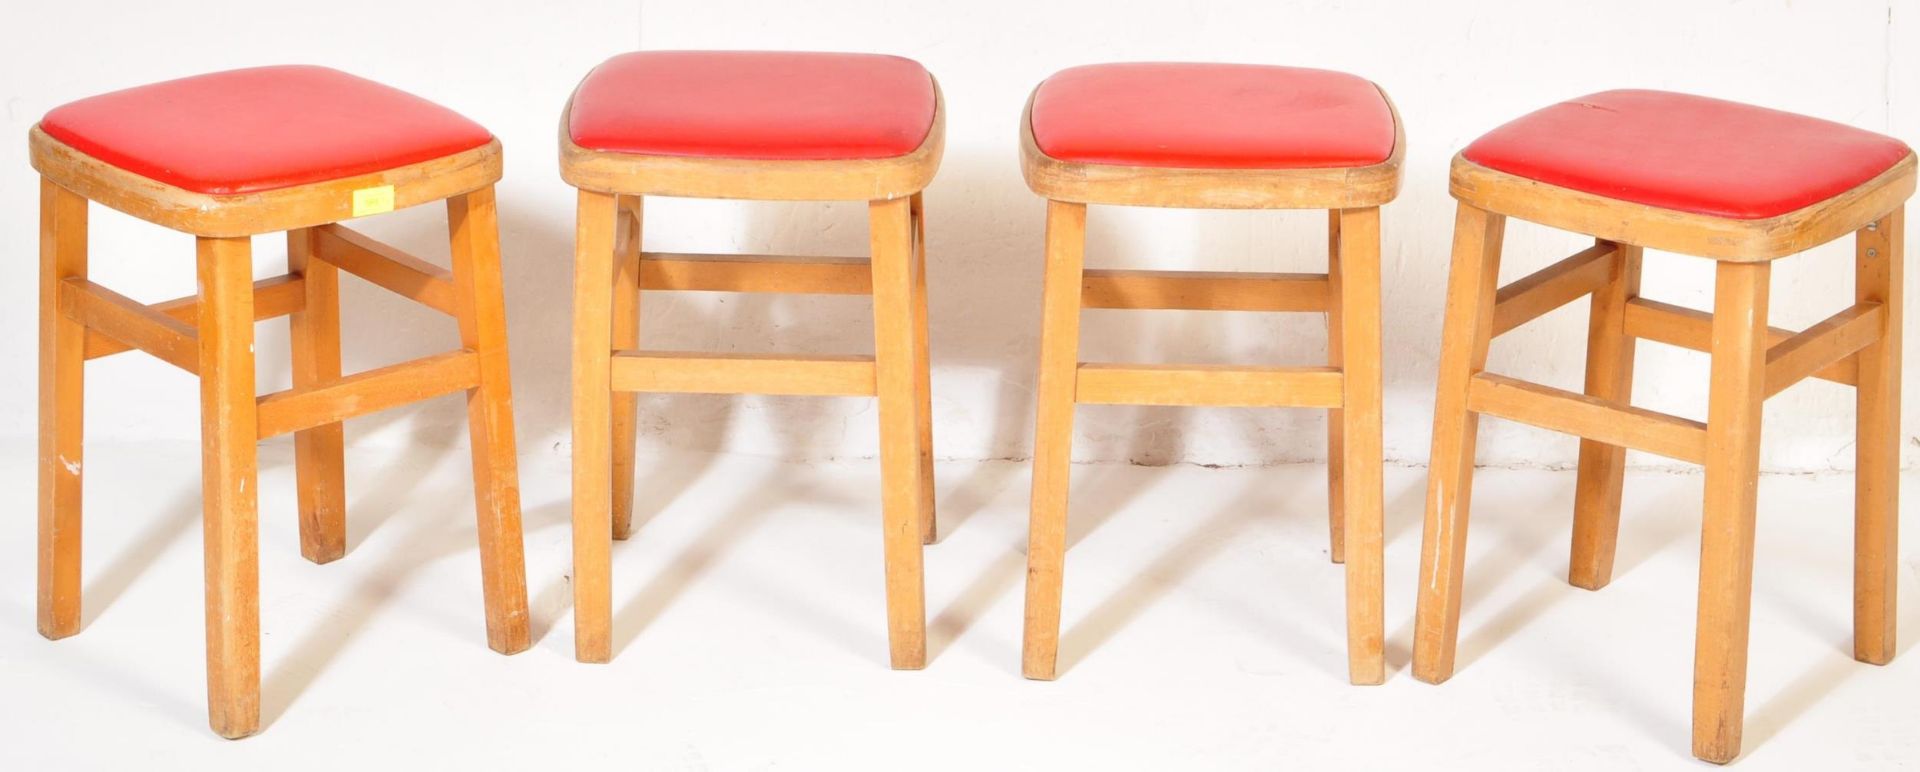 FOUR RETRO MID CENTURY RED LEATHER STOOLS - Image 2 of 5